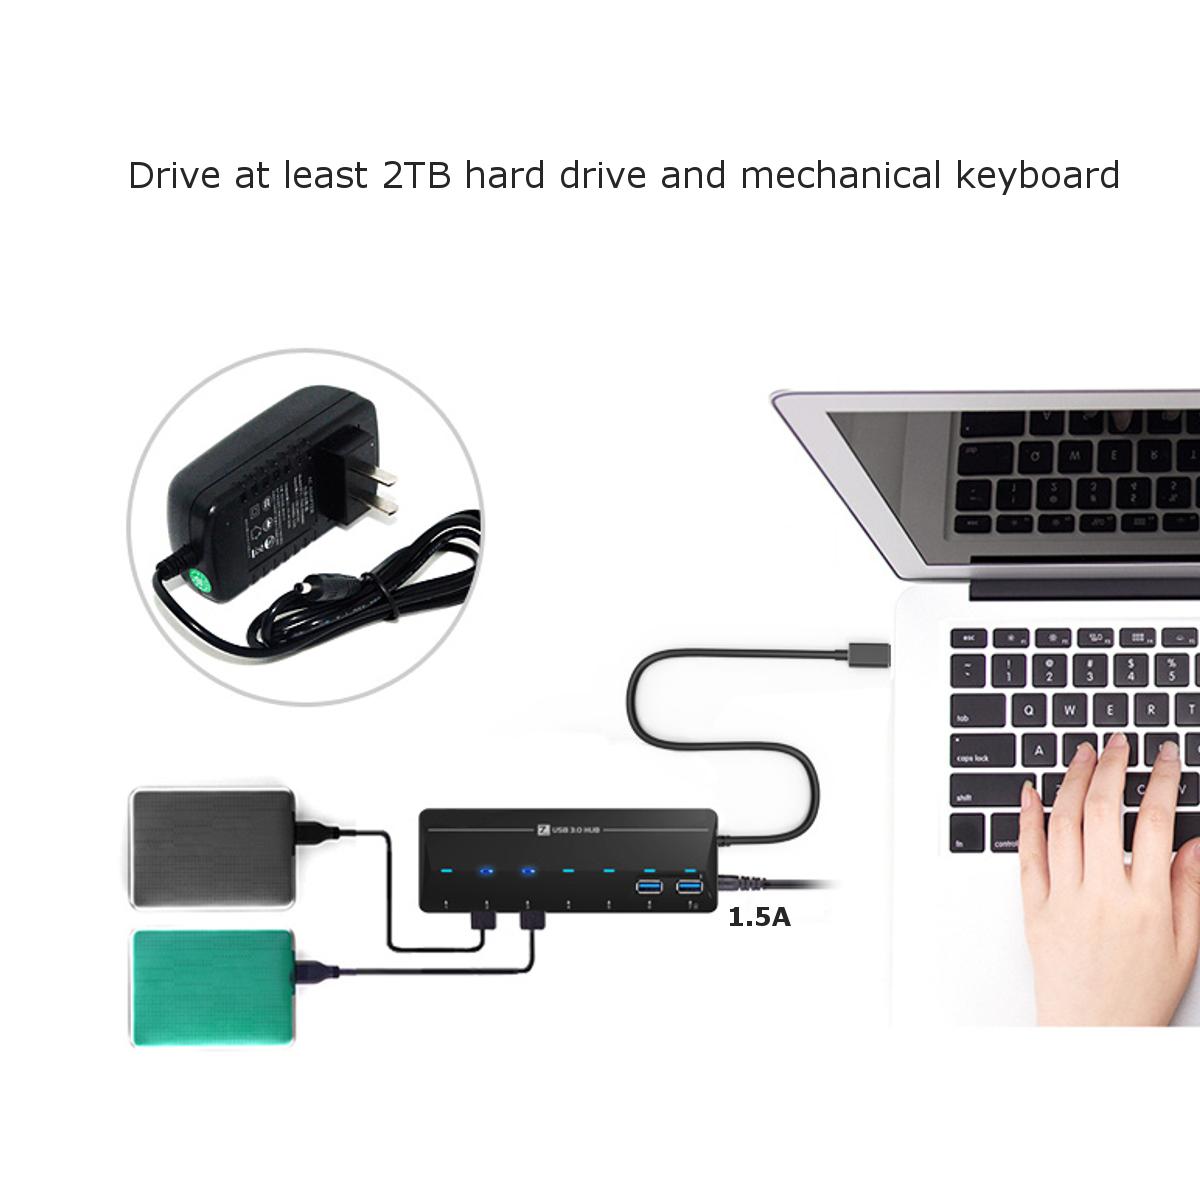 High Speed USB 3.0 7 Ports Hub with 1.5A Quick Charge Port 47